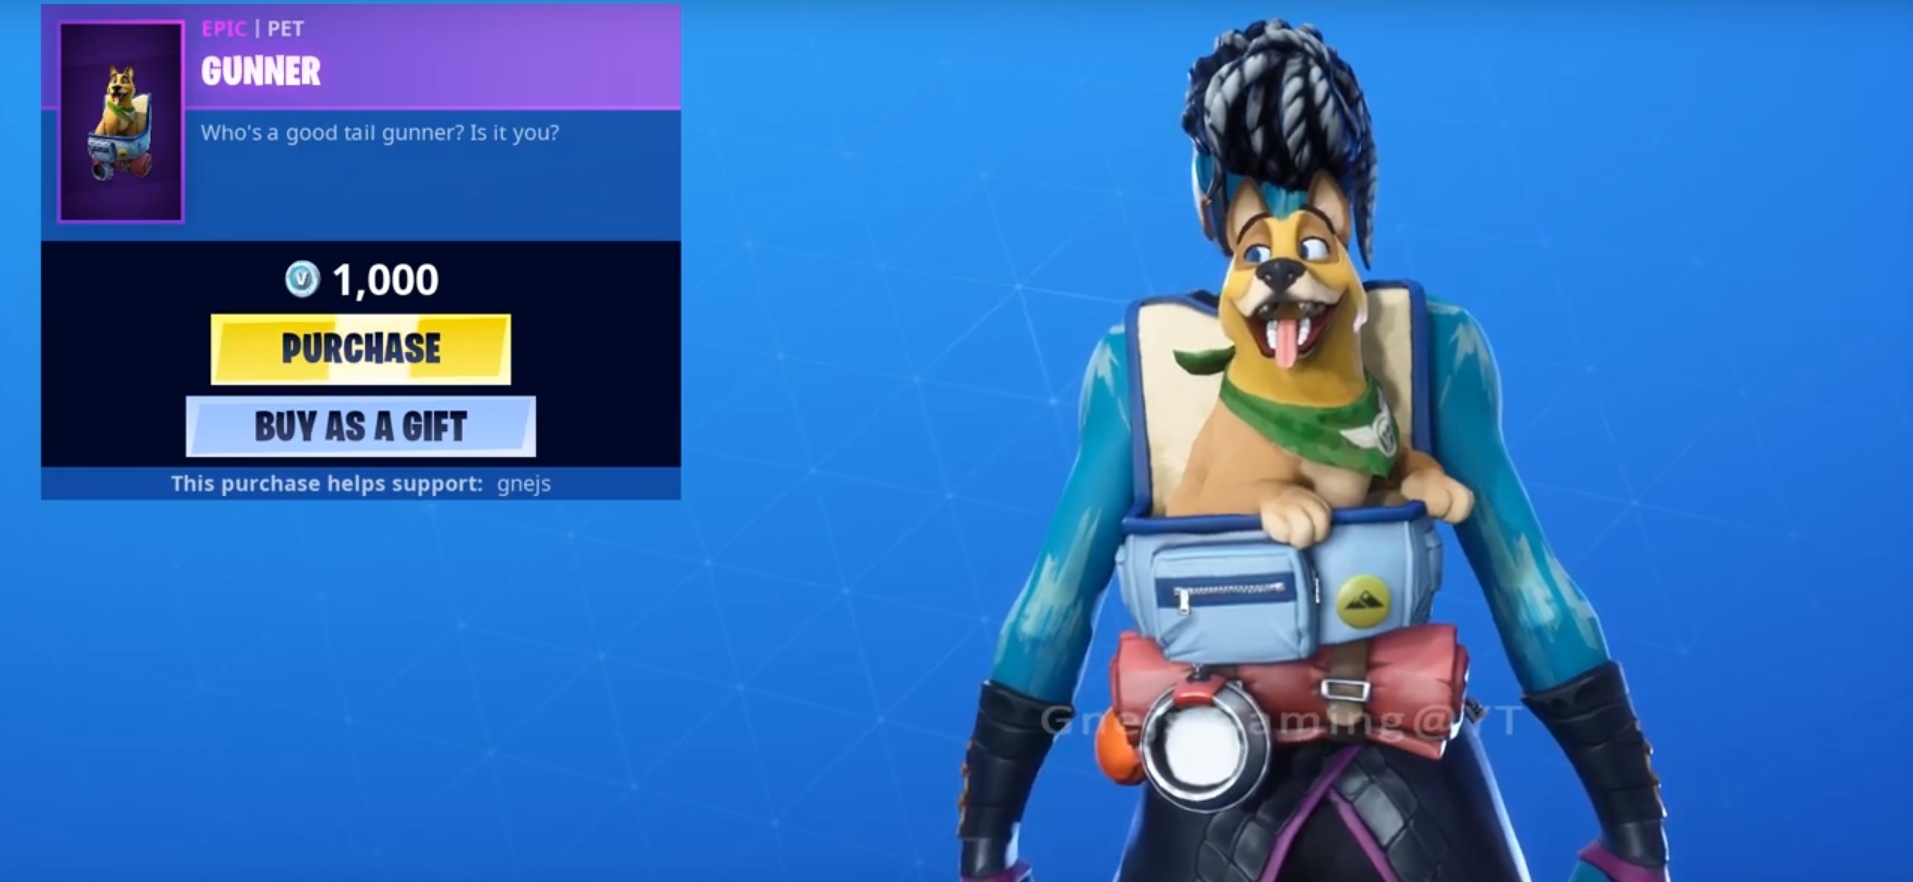 Epic Games Issues Apologies And Refunds For Selling Reskinned Dog